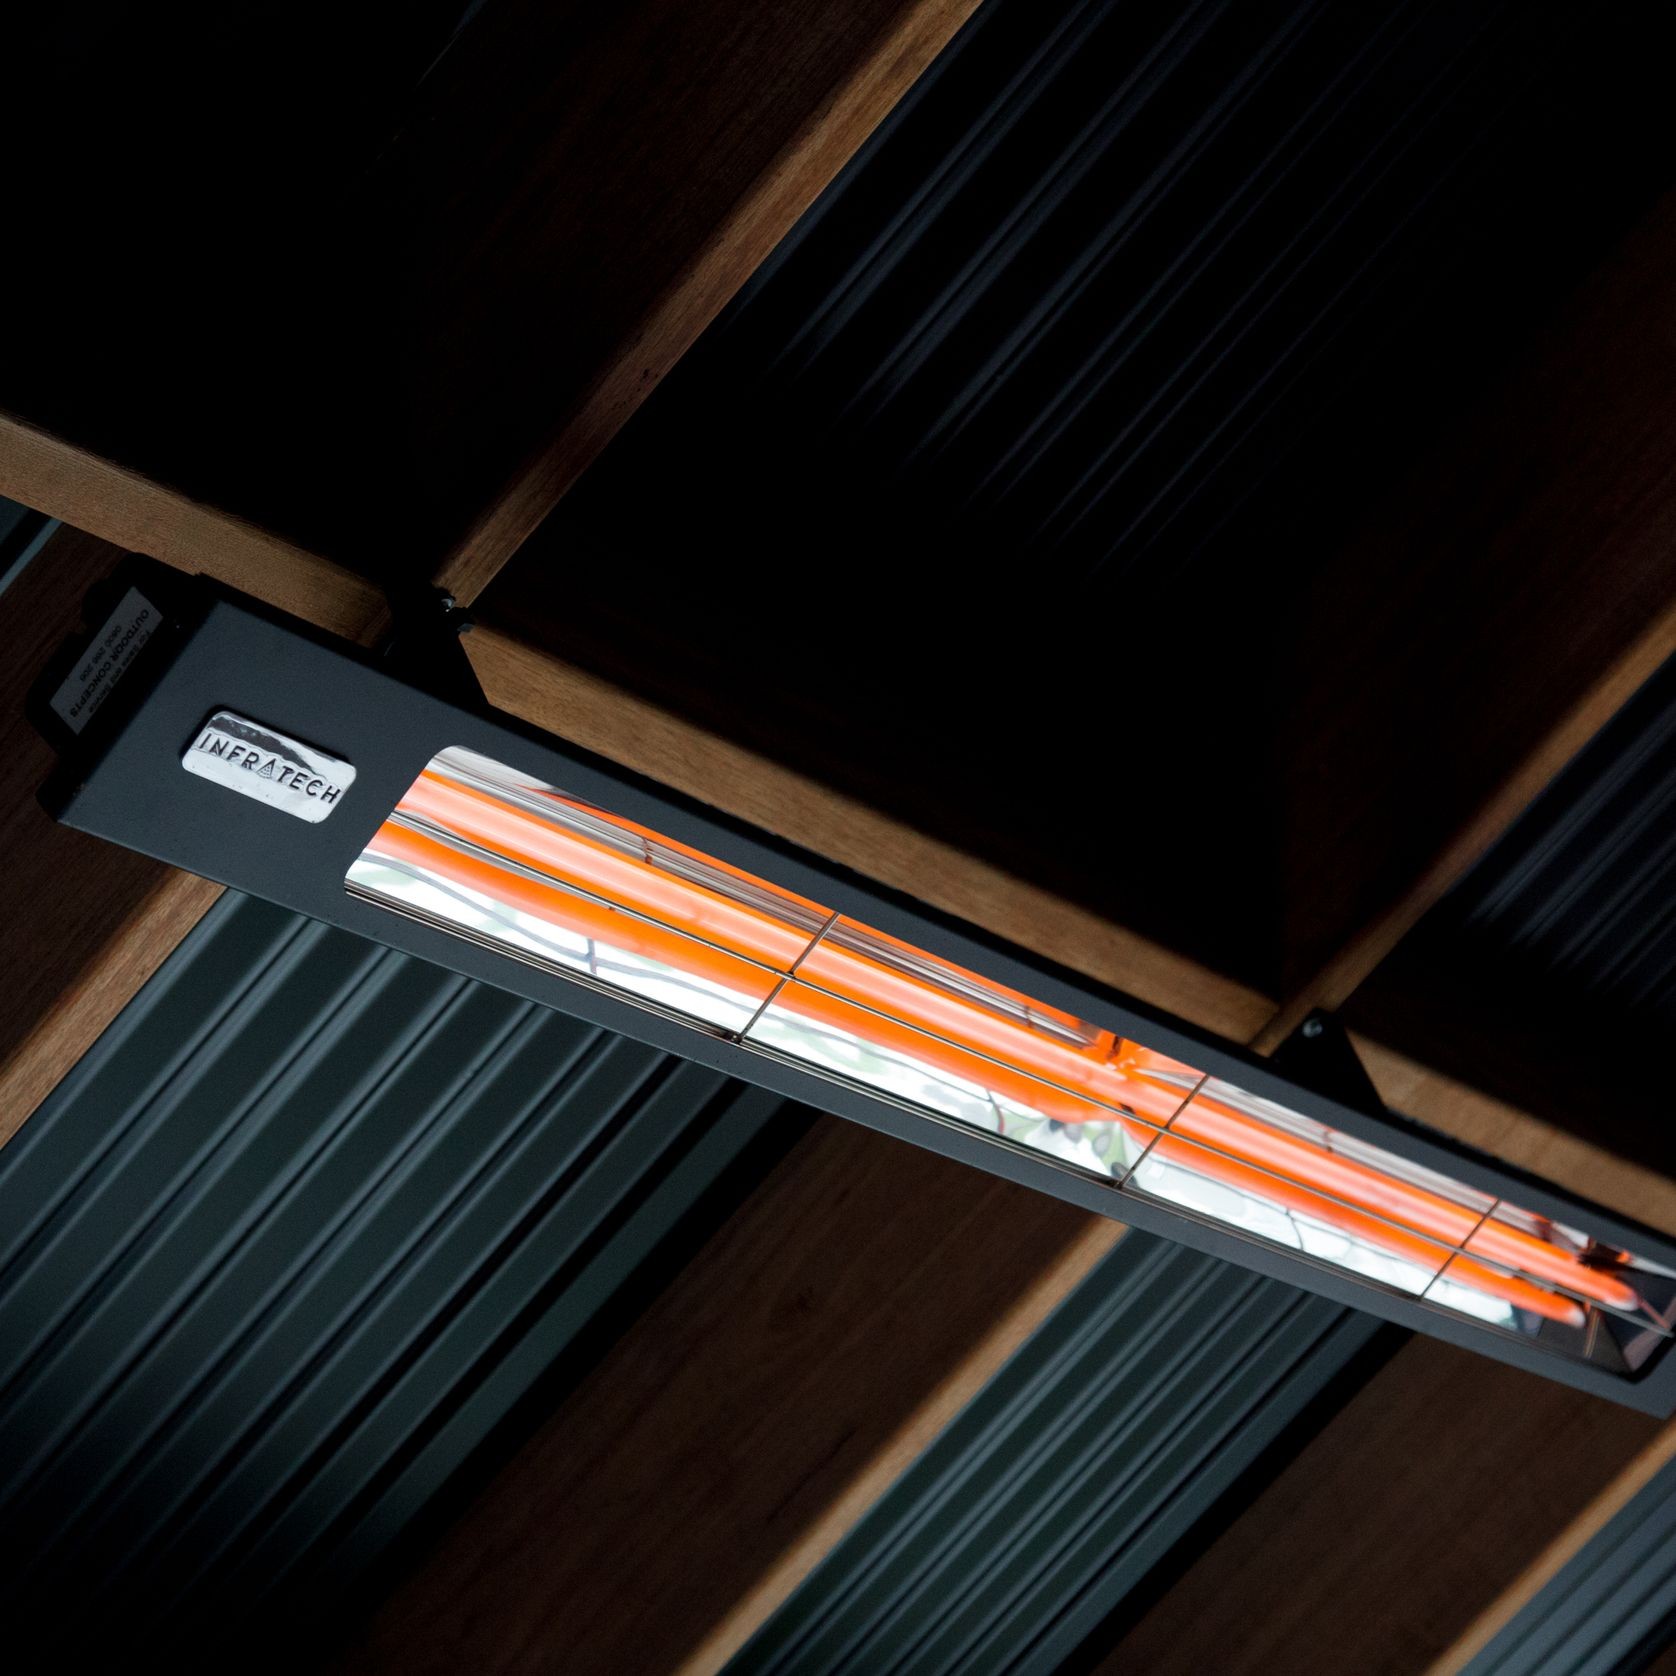 SL30 Heater Black by Infratech gallery detail image